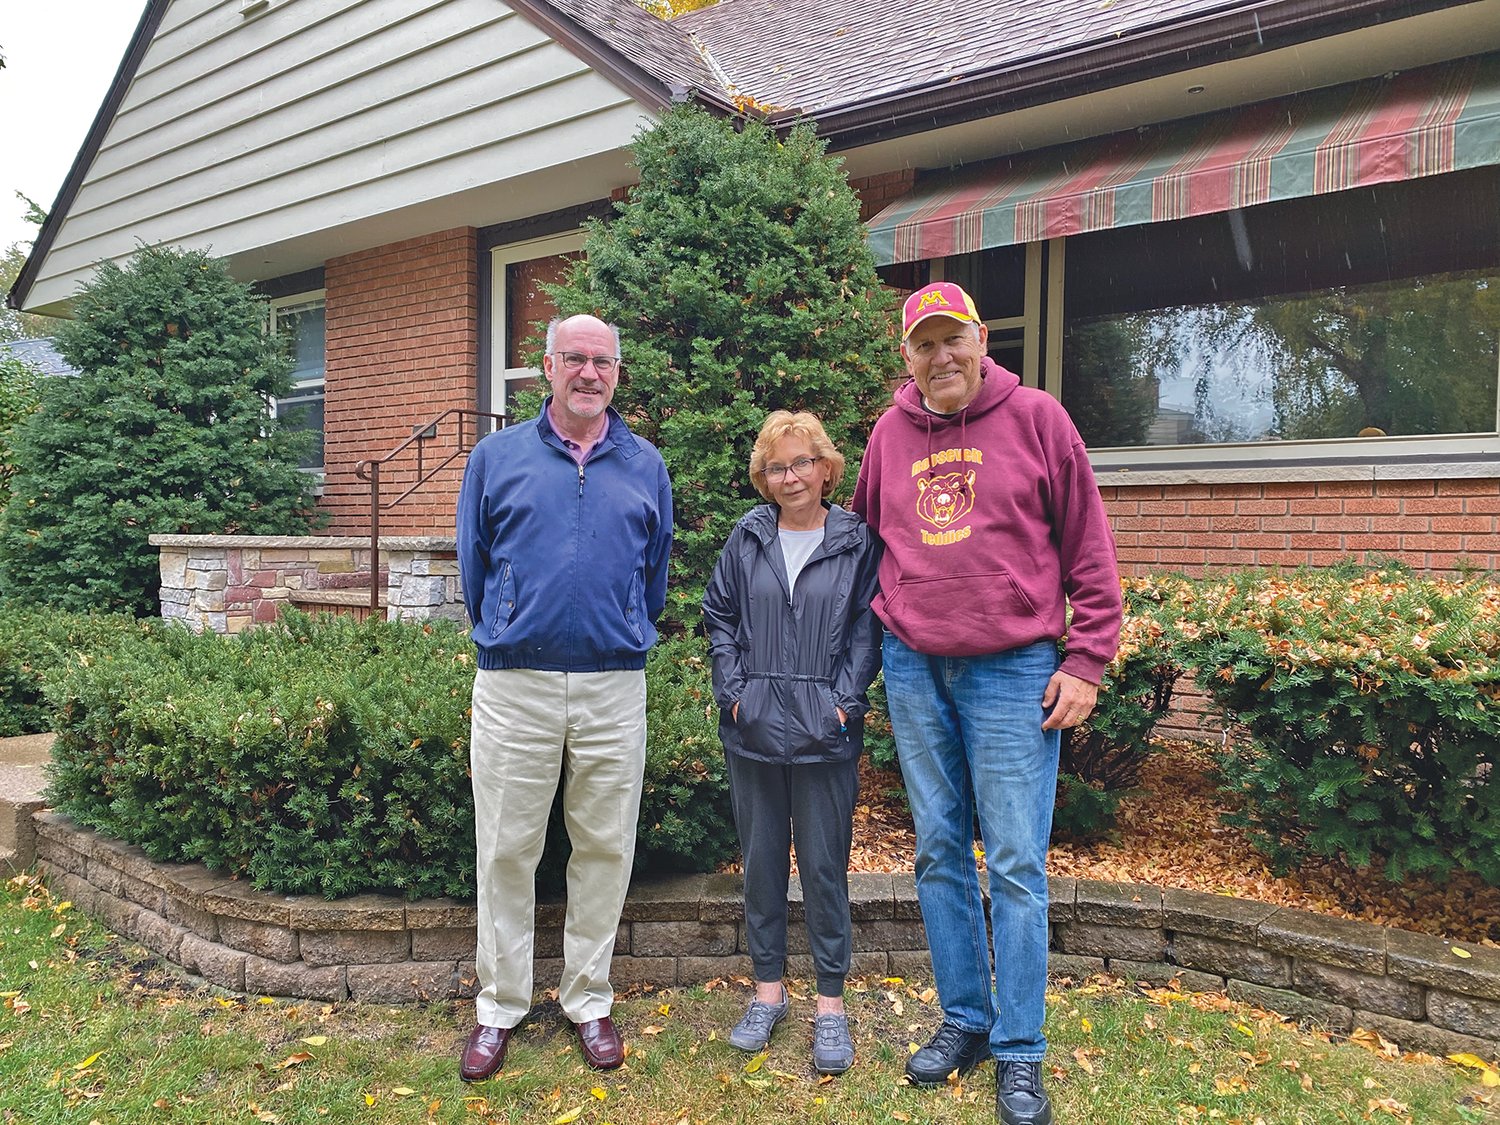 Bob Albrecht (left) stands with Janet and Lee Nelson. Albrecht currently lives and works from home in the house Janet's dad built along Shoreview Ave. Lester Strom was a self-employed home-builder whose firm, Strom & Mayville, constructed many single-family homes, apartments and duplexes in the Nokomis East neighborhood.